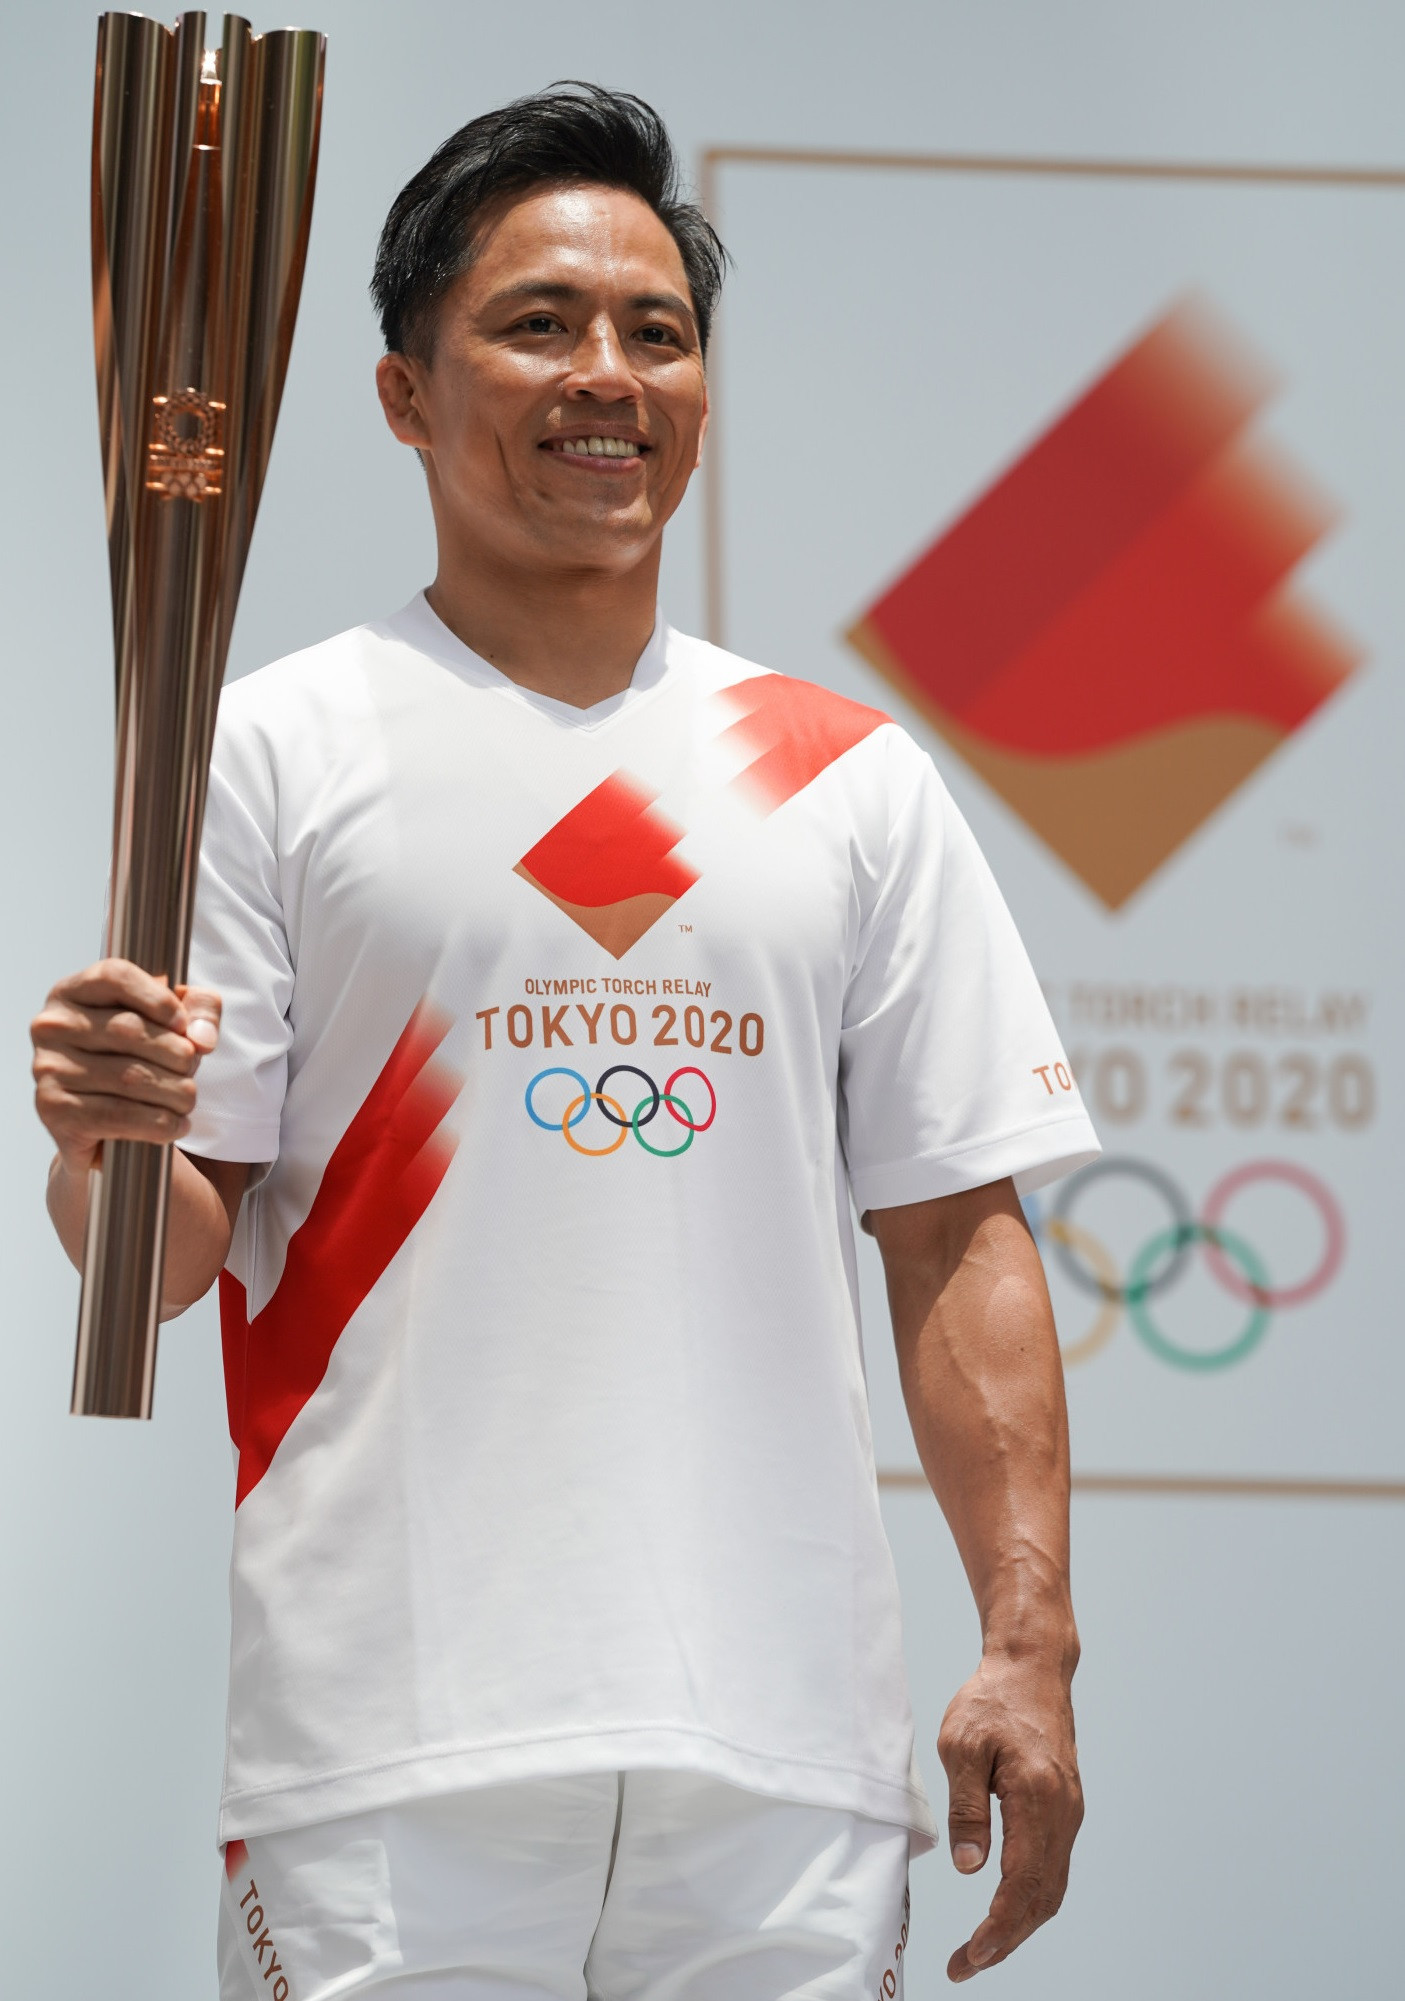 Judoka Tadahiro Nomura is playing his part in bringing the Olympic flame to Tokyo ©Getty Images